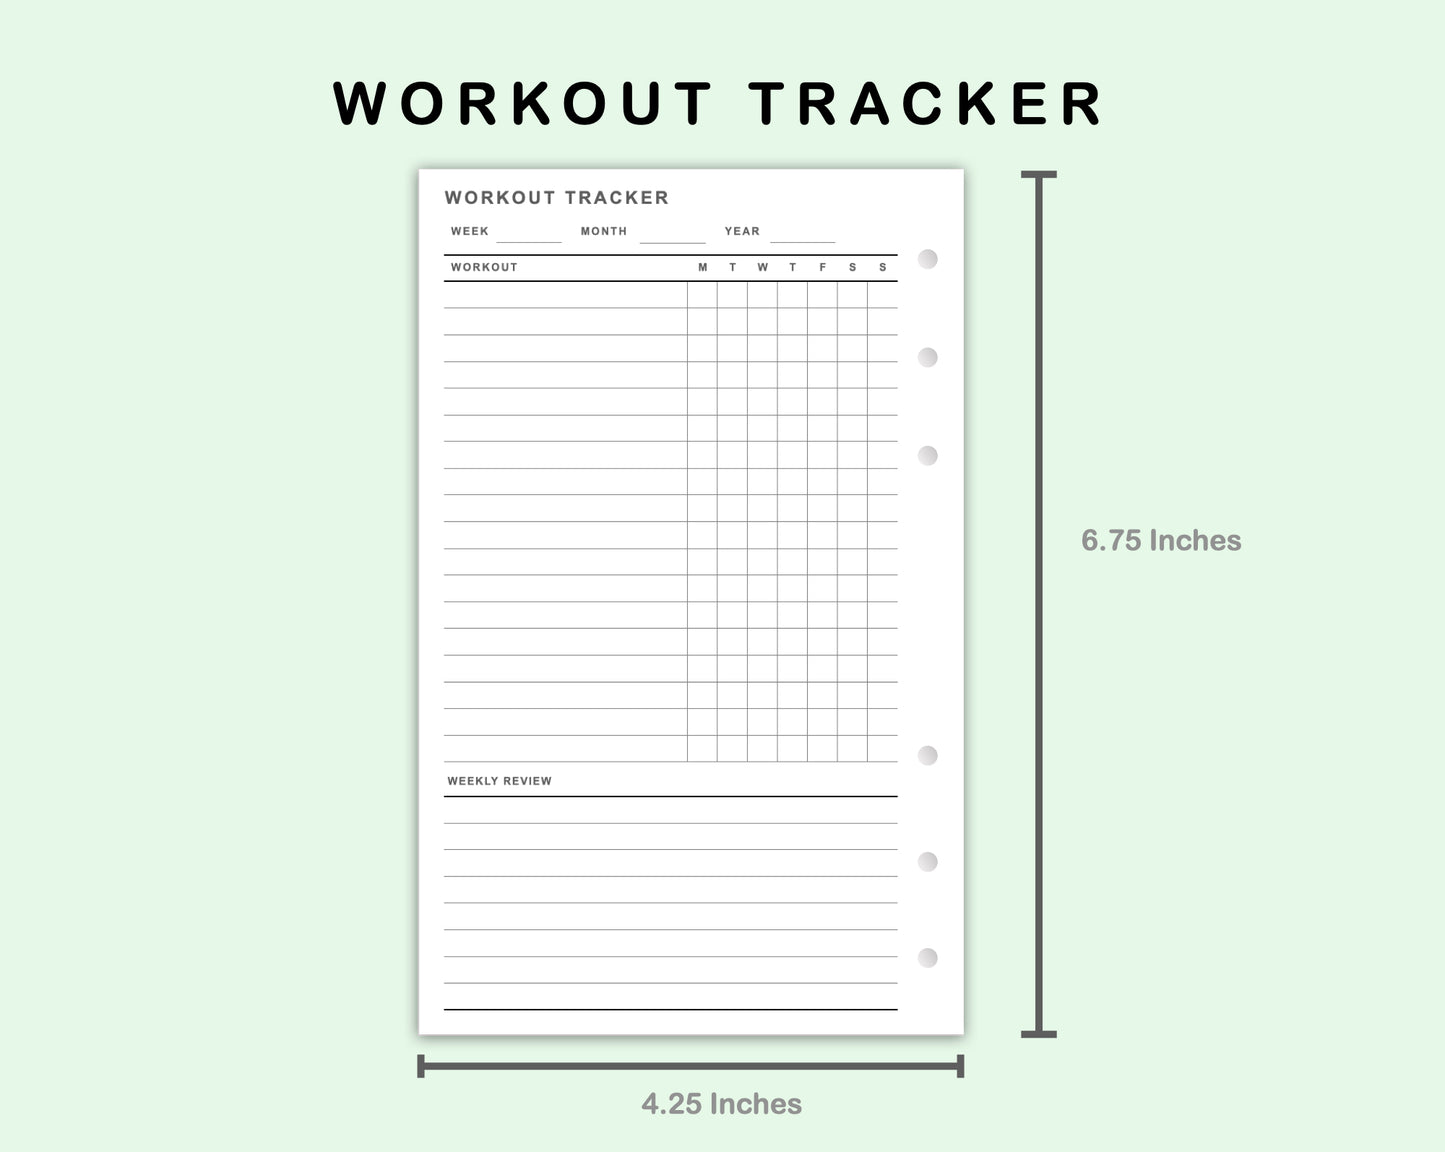 FC Compact Inserts - Workout Tracker